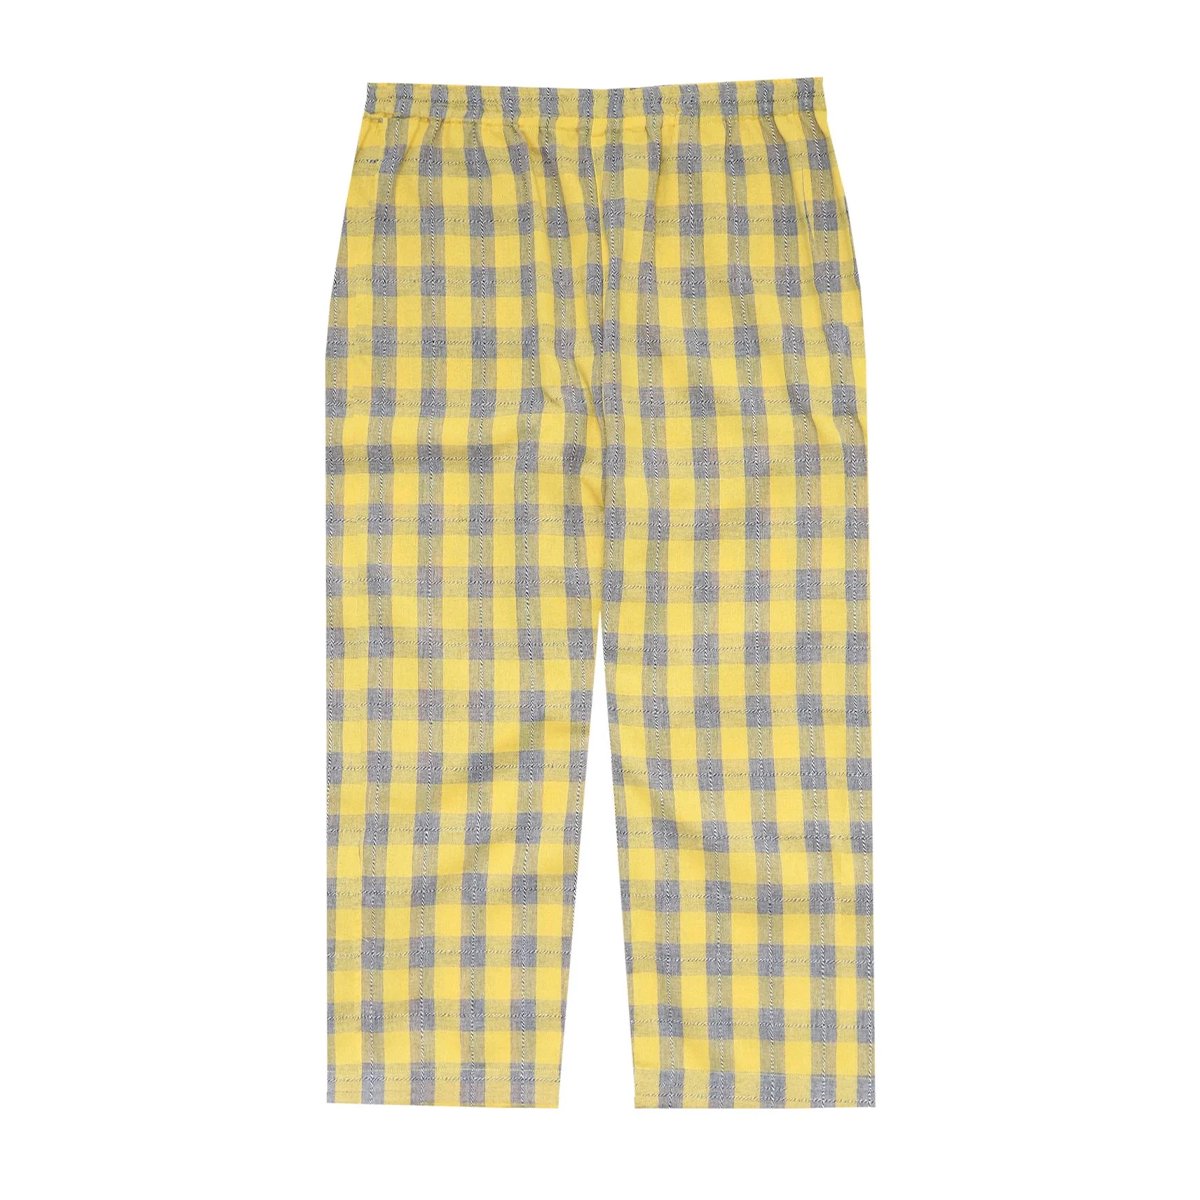 <img class='new_mark_img1' src='https://img.shop-pro.jp/img/new/icons8.gif' style='border:none;display:inline;margin:0px;padding:0px;width:auto;' />WhimsyPlaid Beach Pants (Yellow)
                          </a>
            <span class=